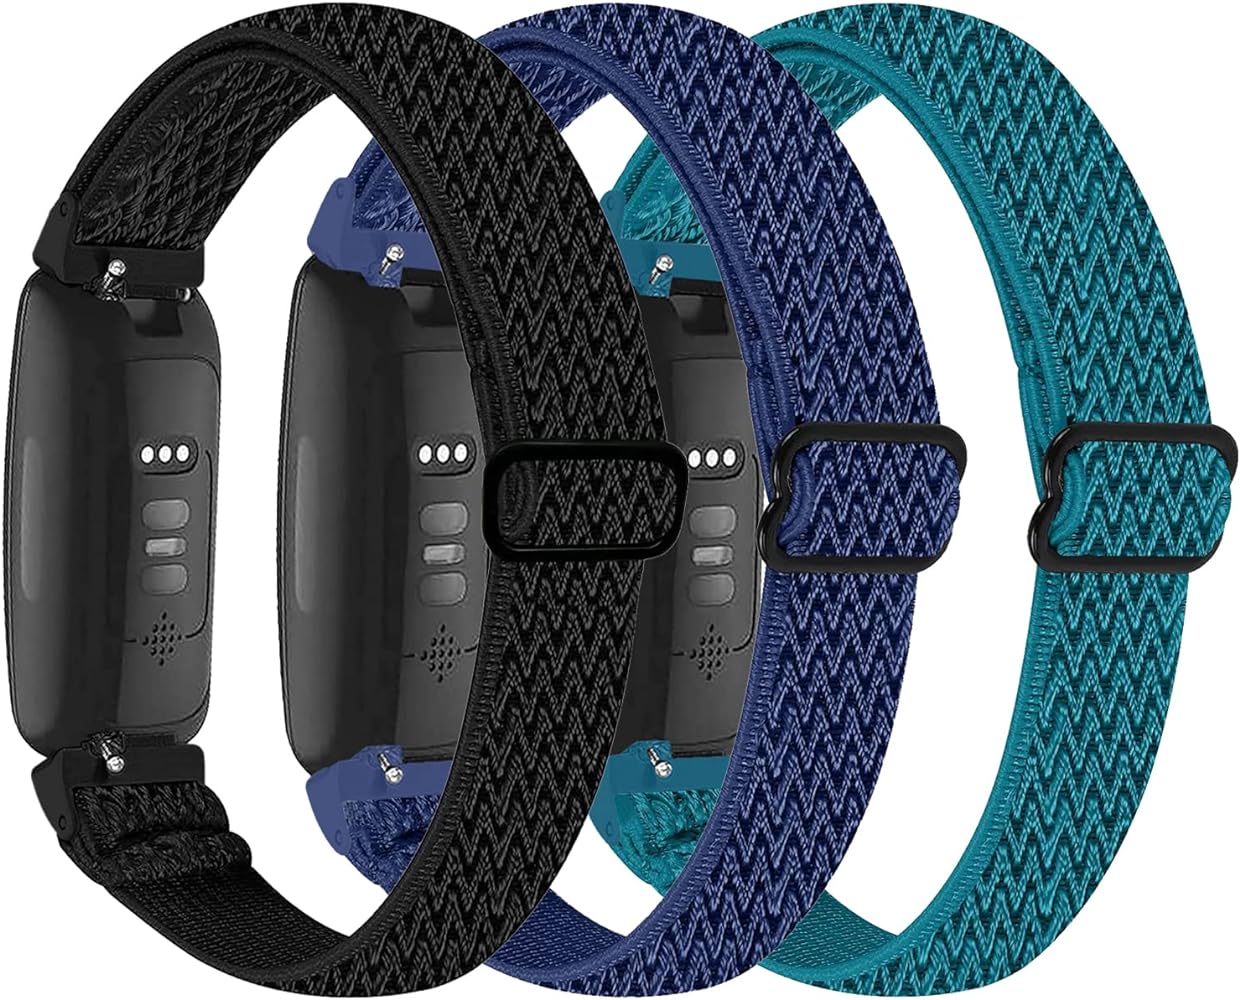 Band Material: Understanding What The Fitbit Band Is Made Of